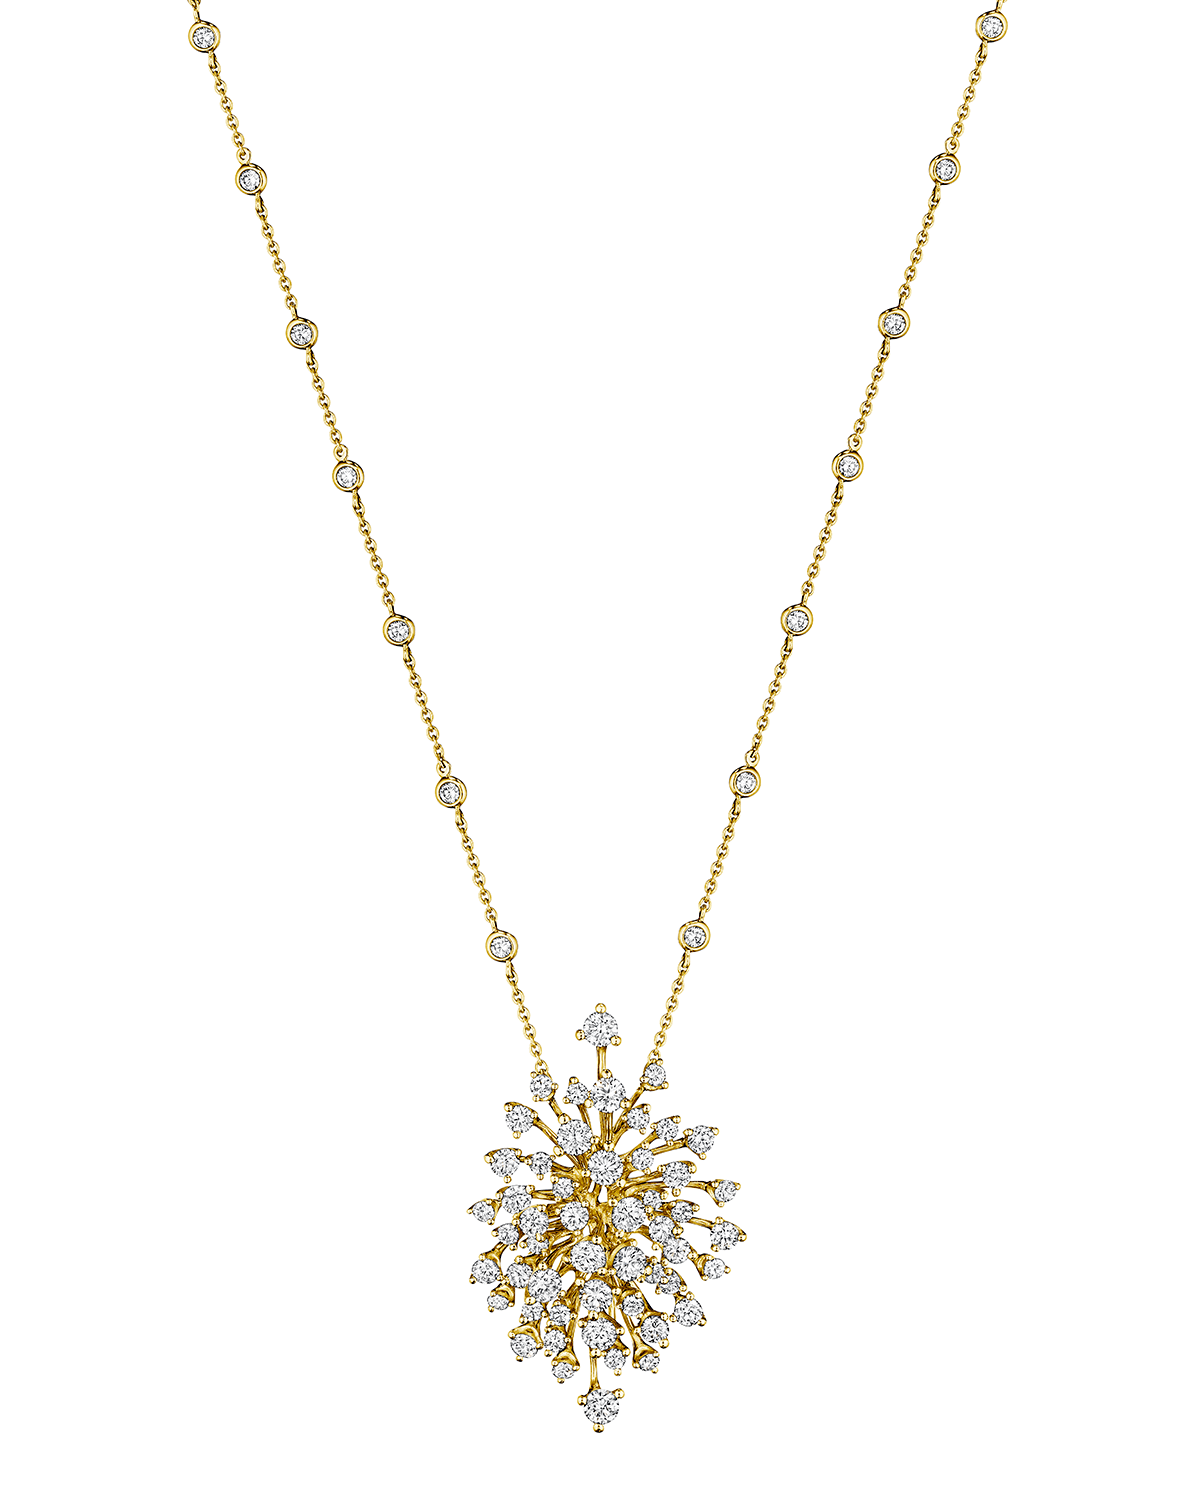 Hueb Luminus 18k Yellow Gold Diamond Chain And Cluster Necklace